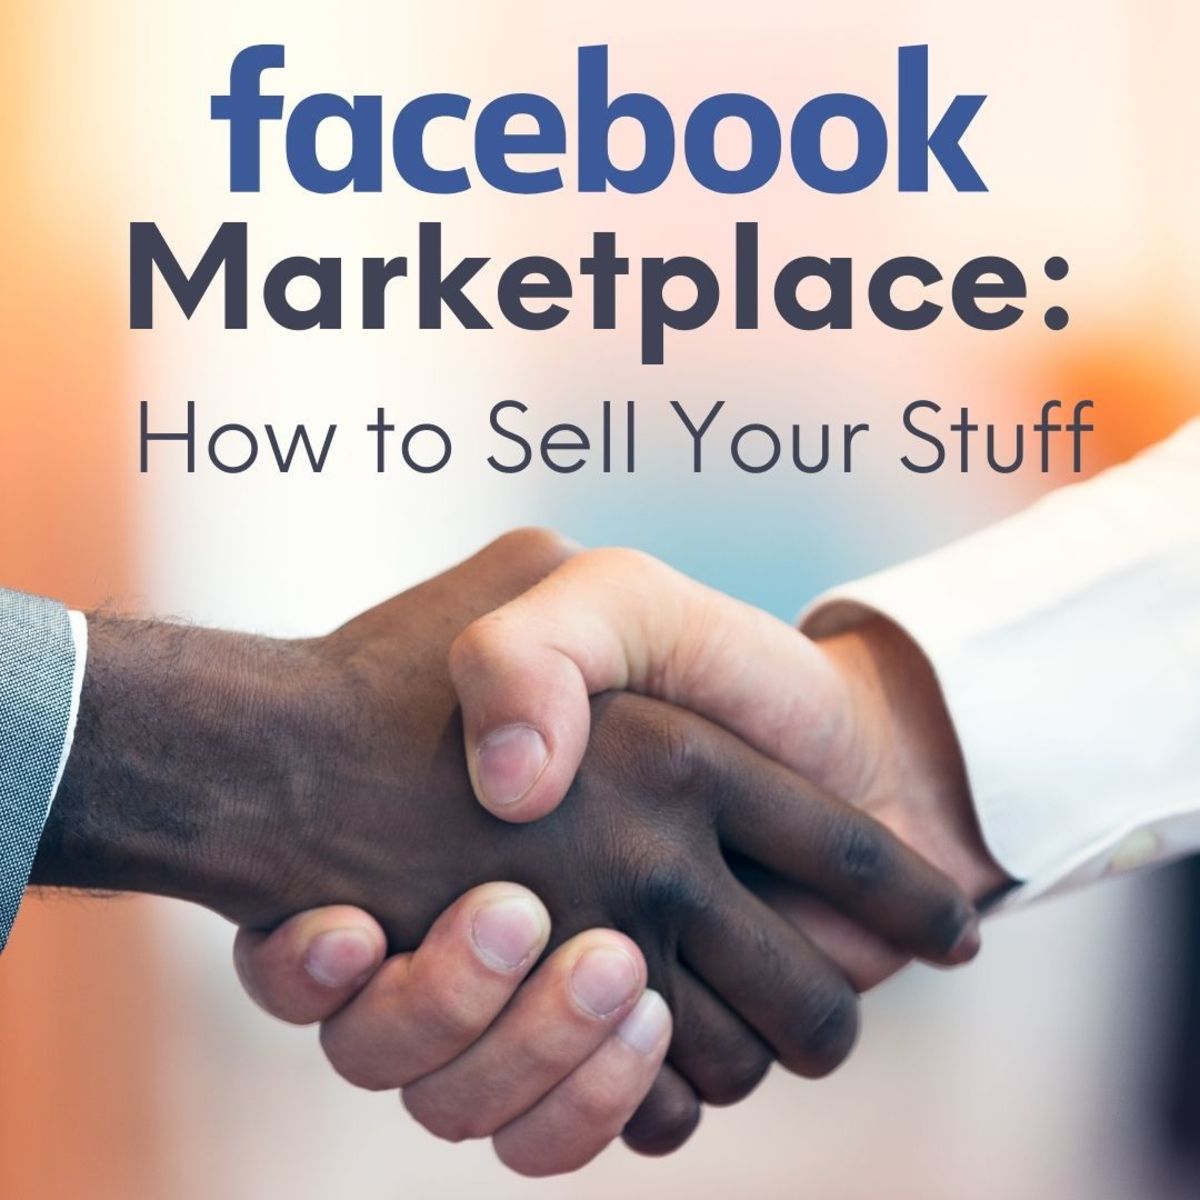 How to Sell Items on Facebook Marketplace